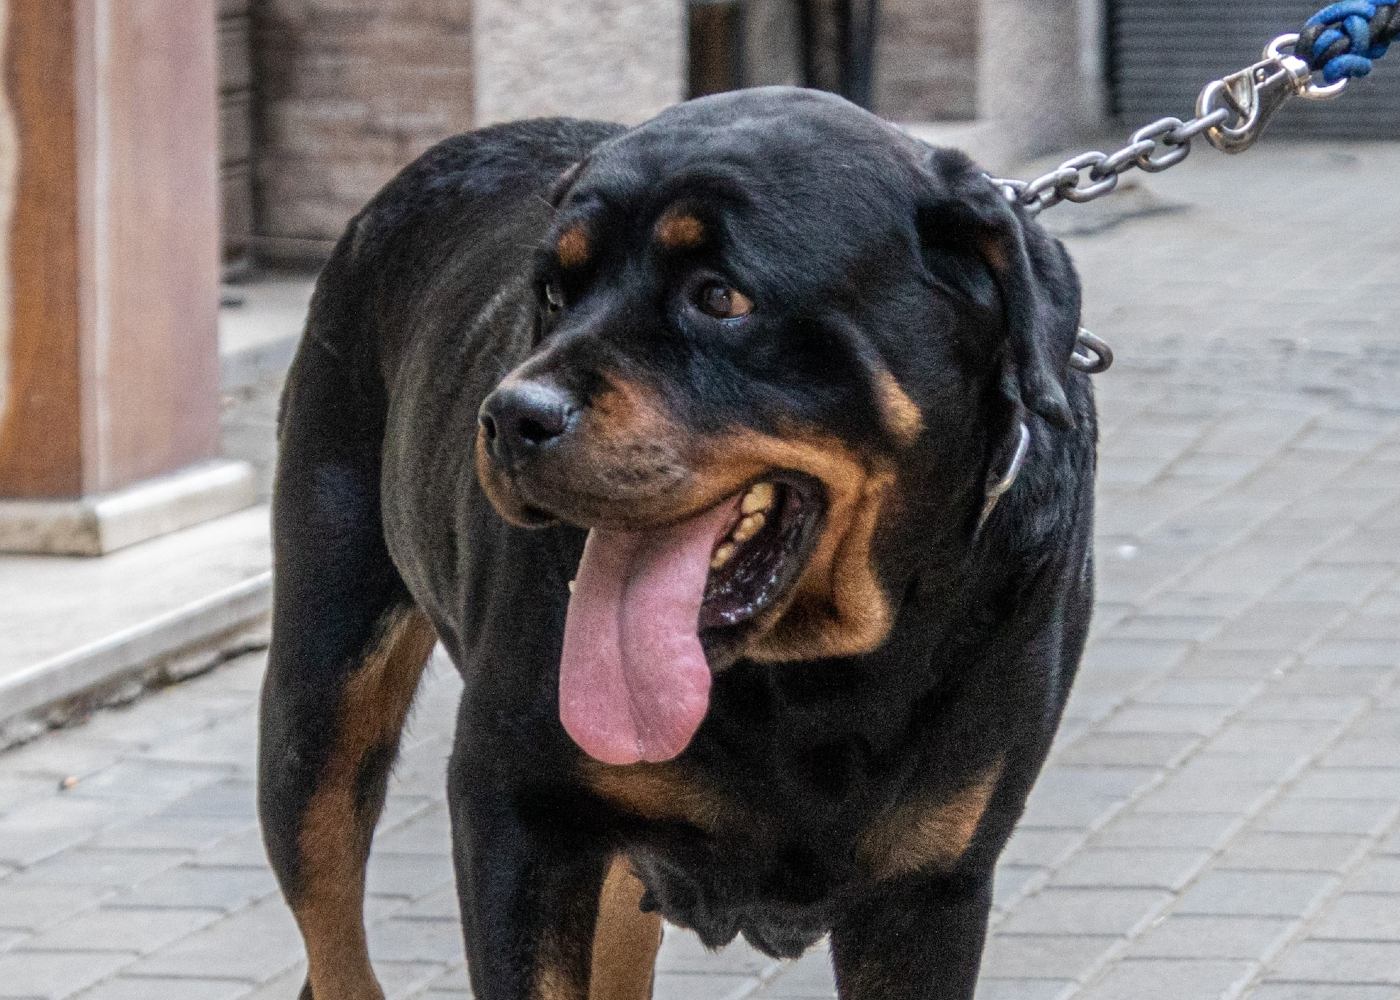 A Rottweiler with furrowed eyebrows looking nervous